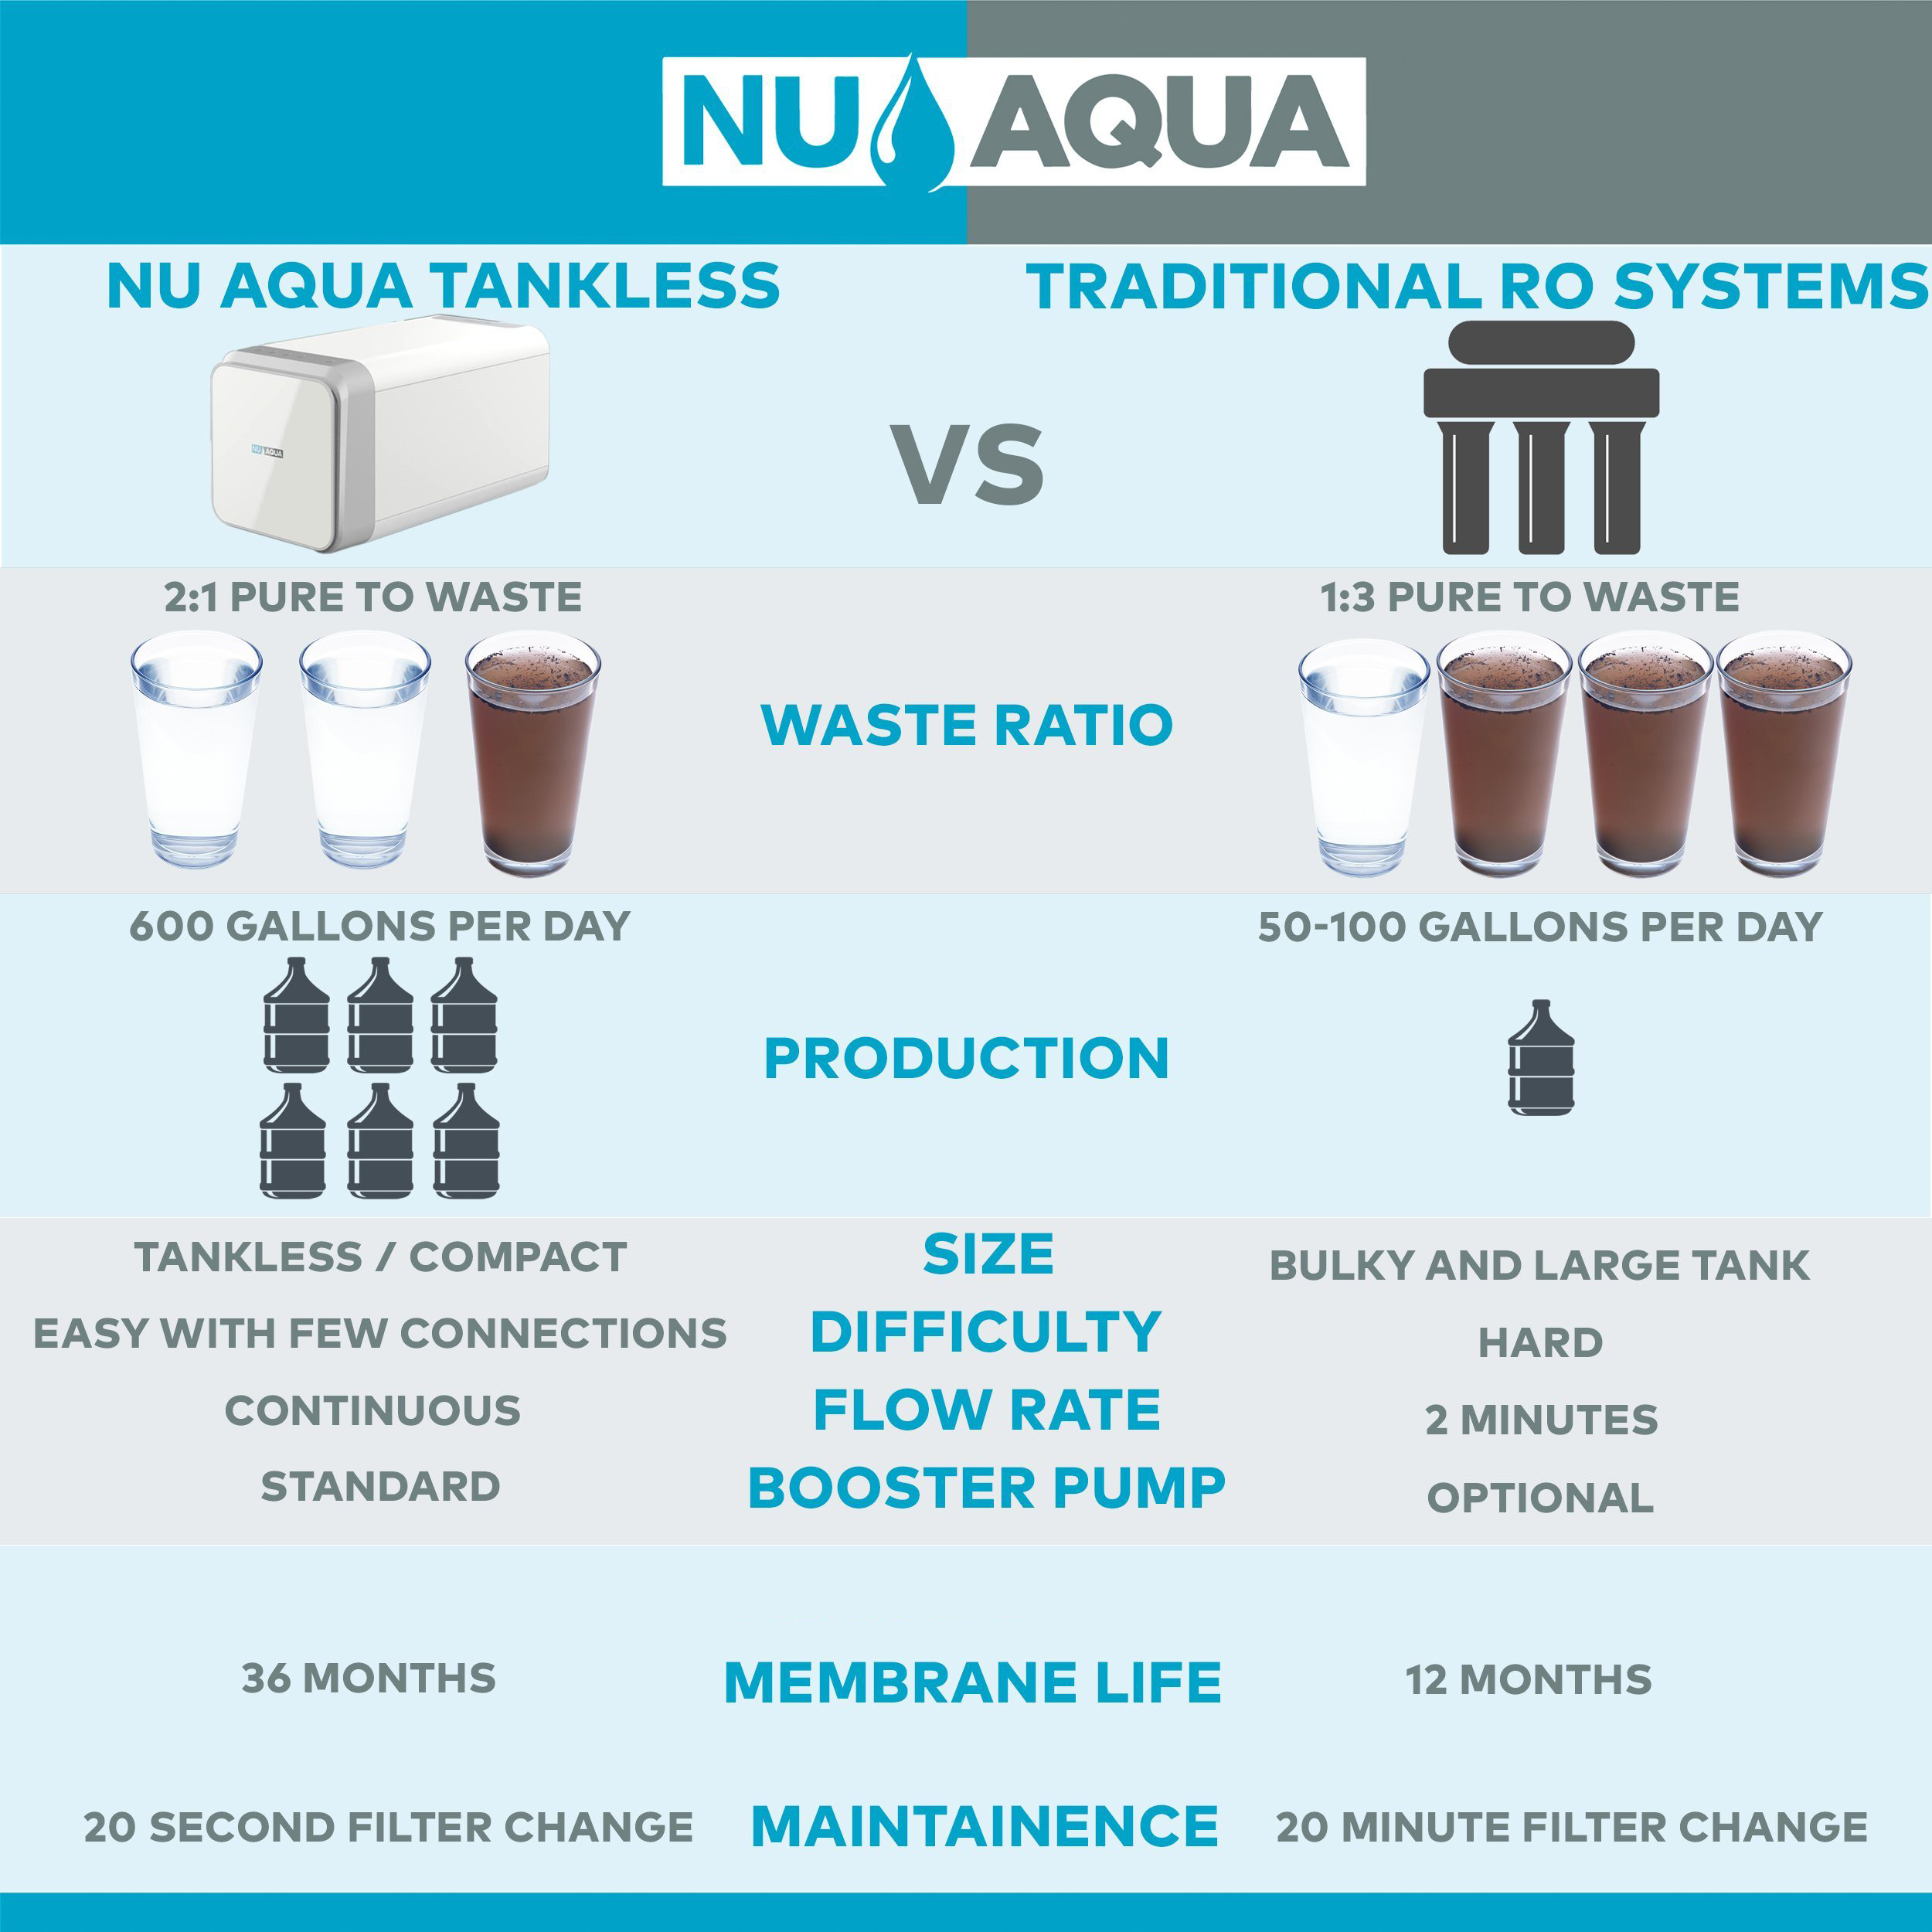 Reverse Osmosis Systems Nu Aqua Tankless 800GPD Comparison to Traditional Systems